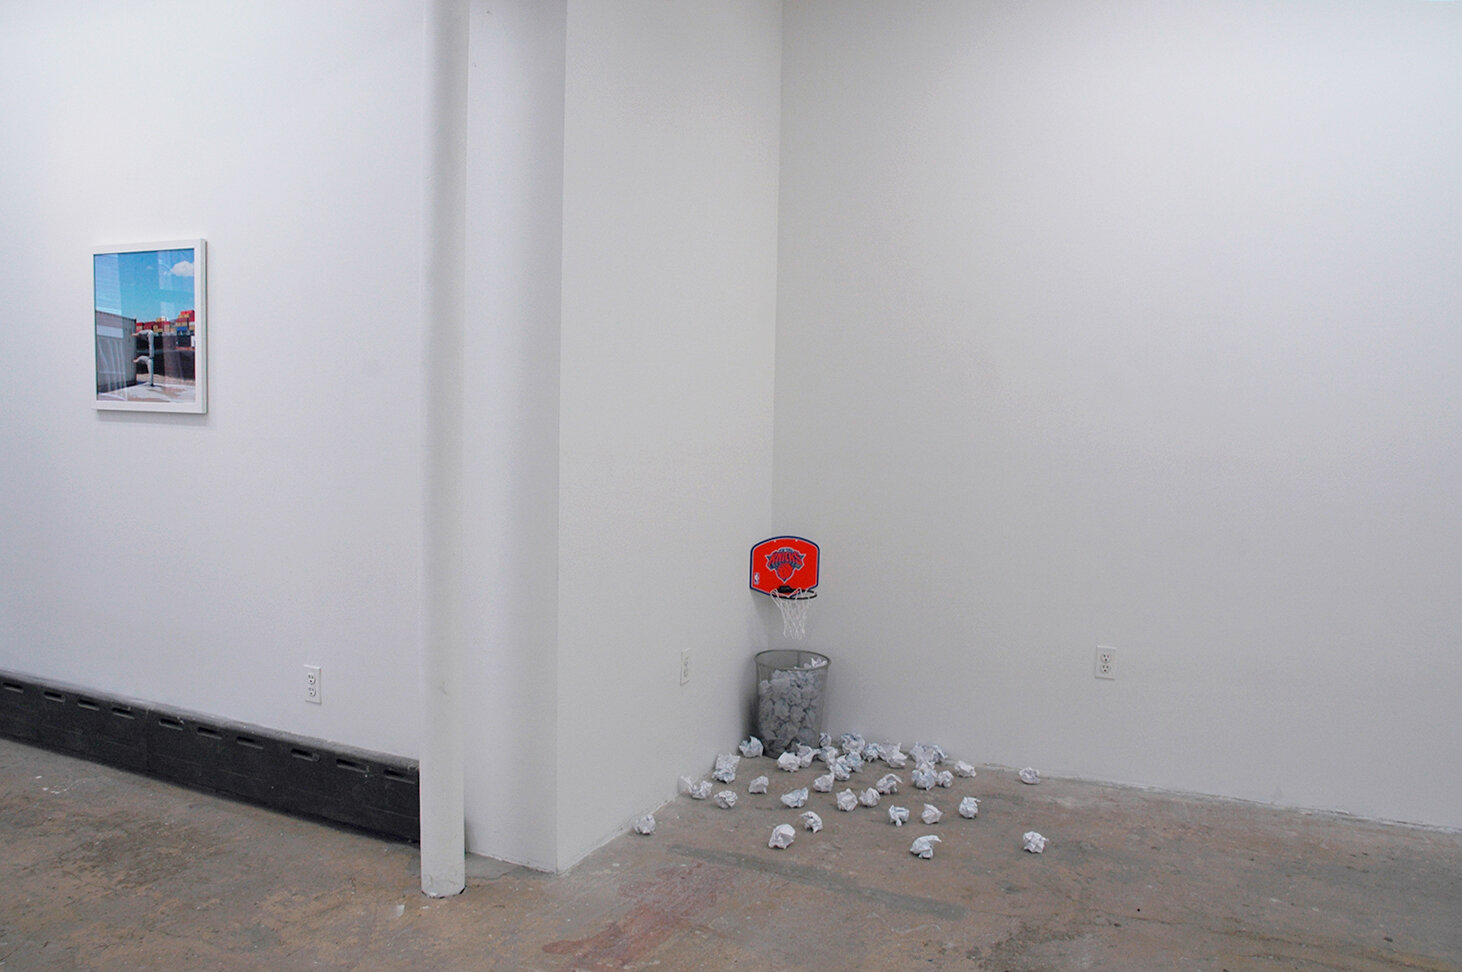 Installation image from the 2013 exhibition, Studio Audience, featuring works by Alan and Michael Fleming, at Cindy Rucker Gallery